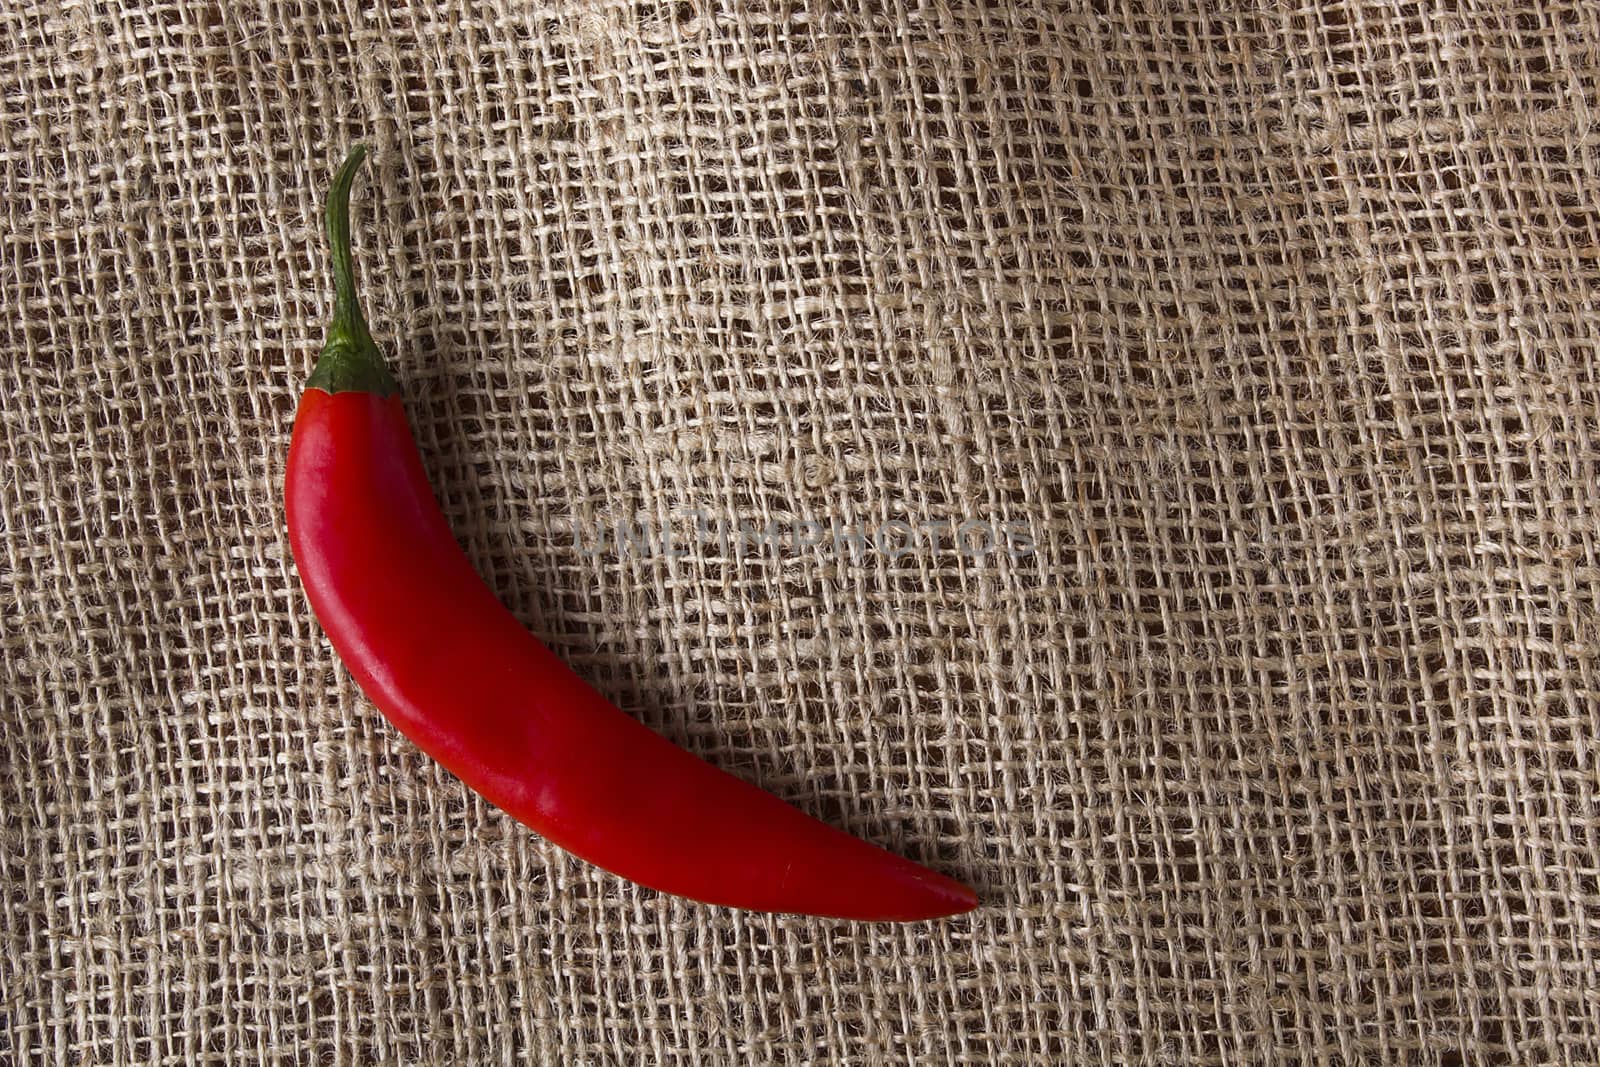 Red chili peppers on a brown burlap background